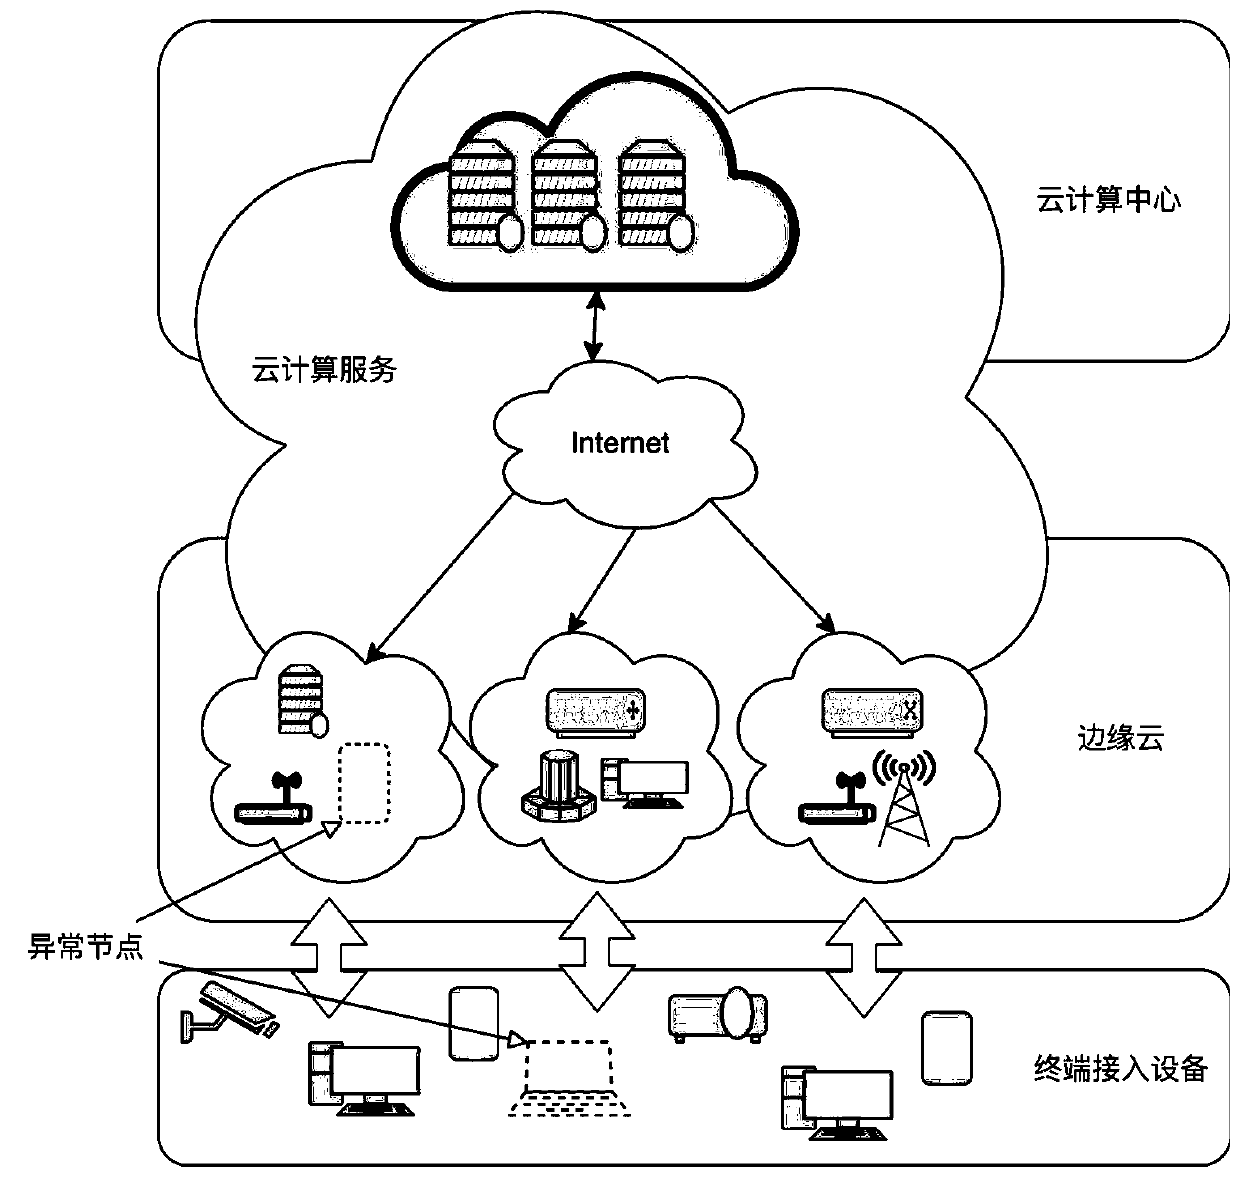 Edge cloud anomaly detection method based on network structure learning